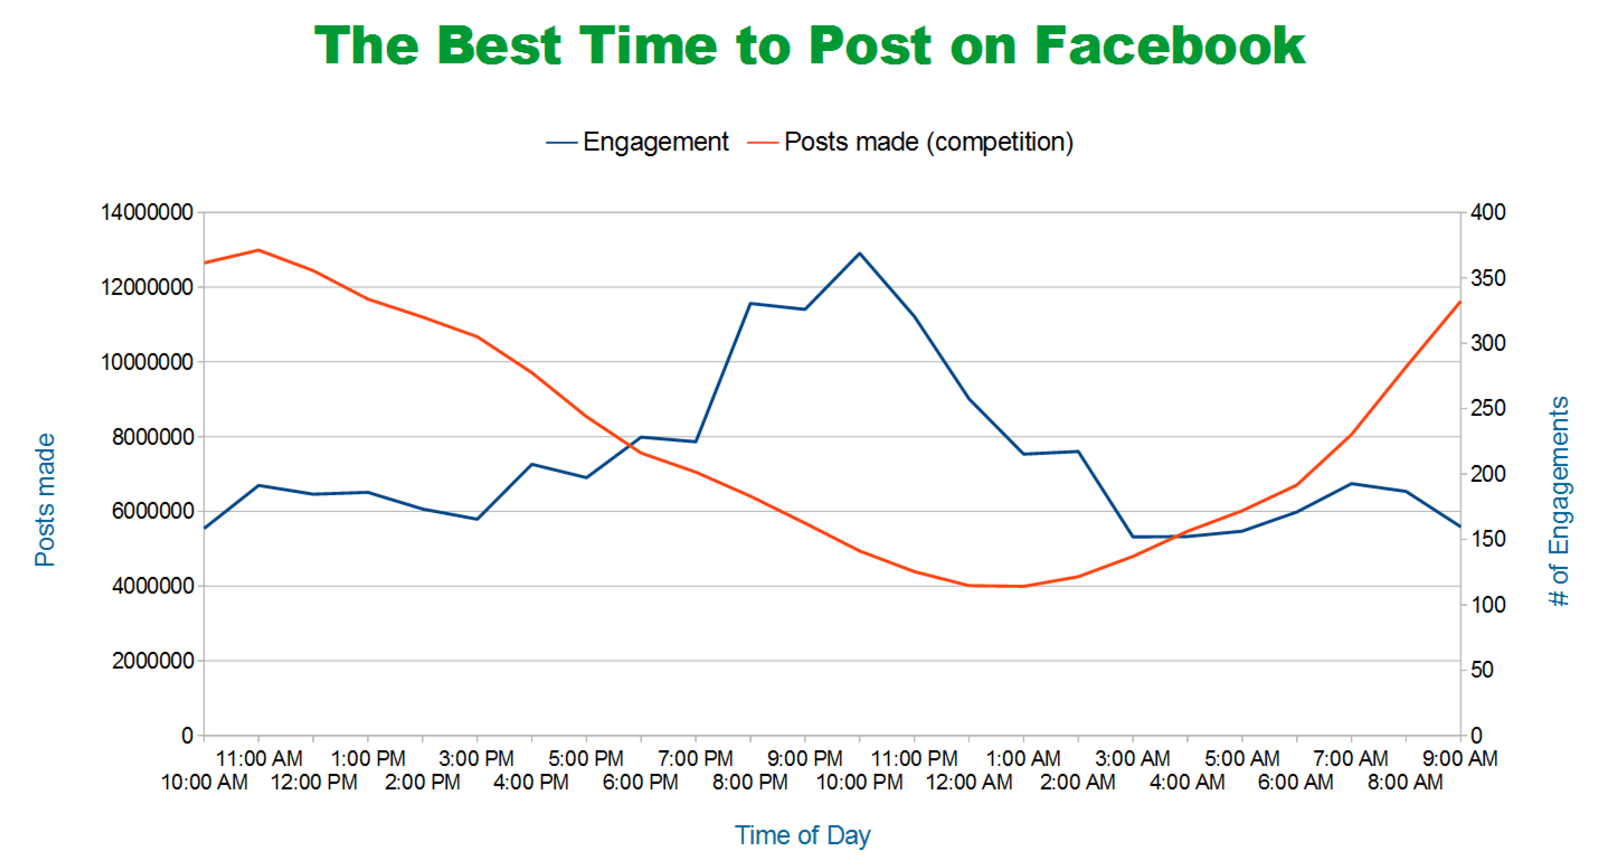 Posts get the most engagement when the total amount of posts is at its lowest on Facebook.